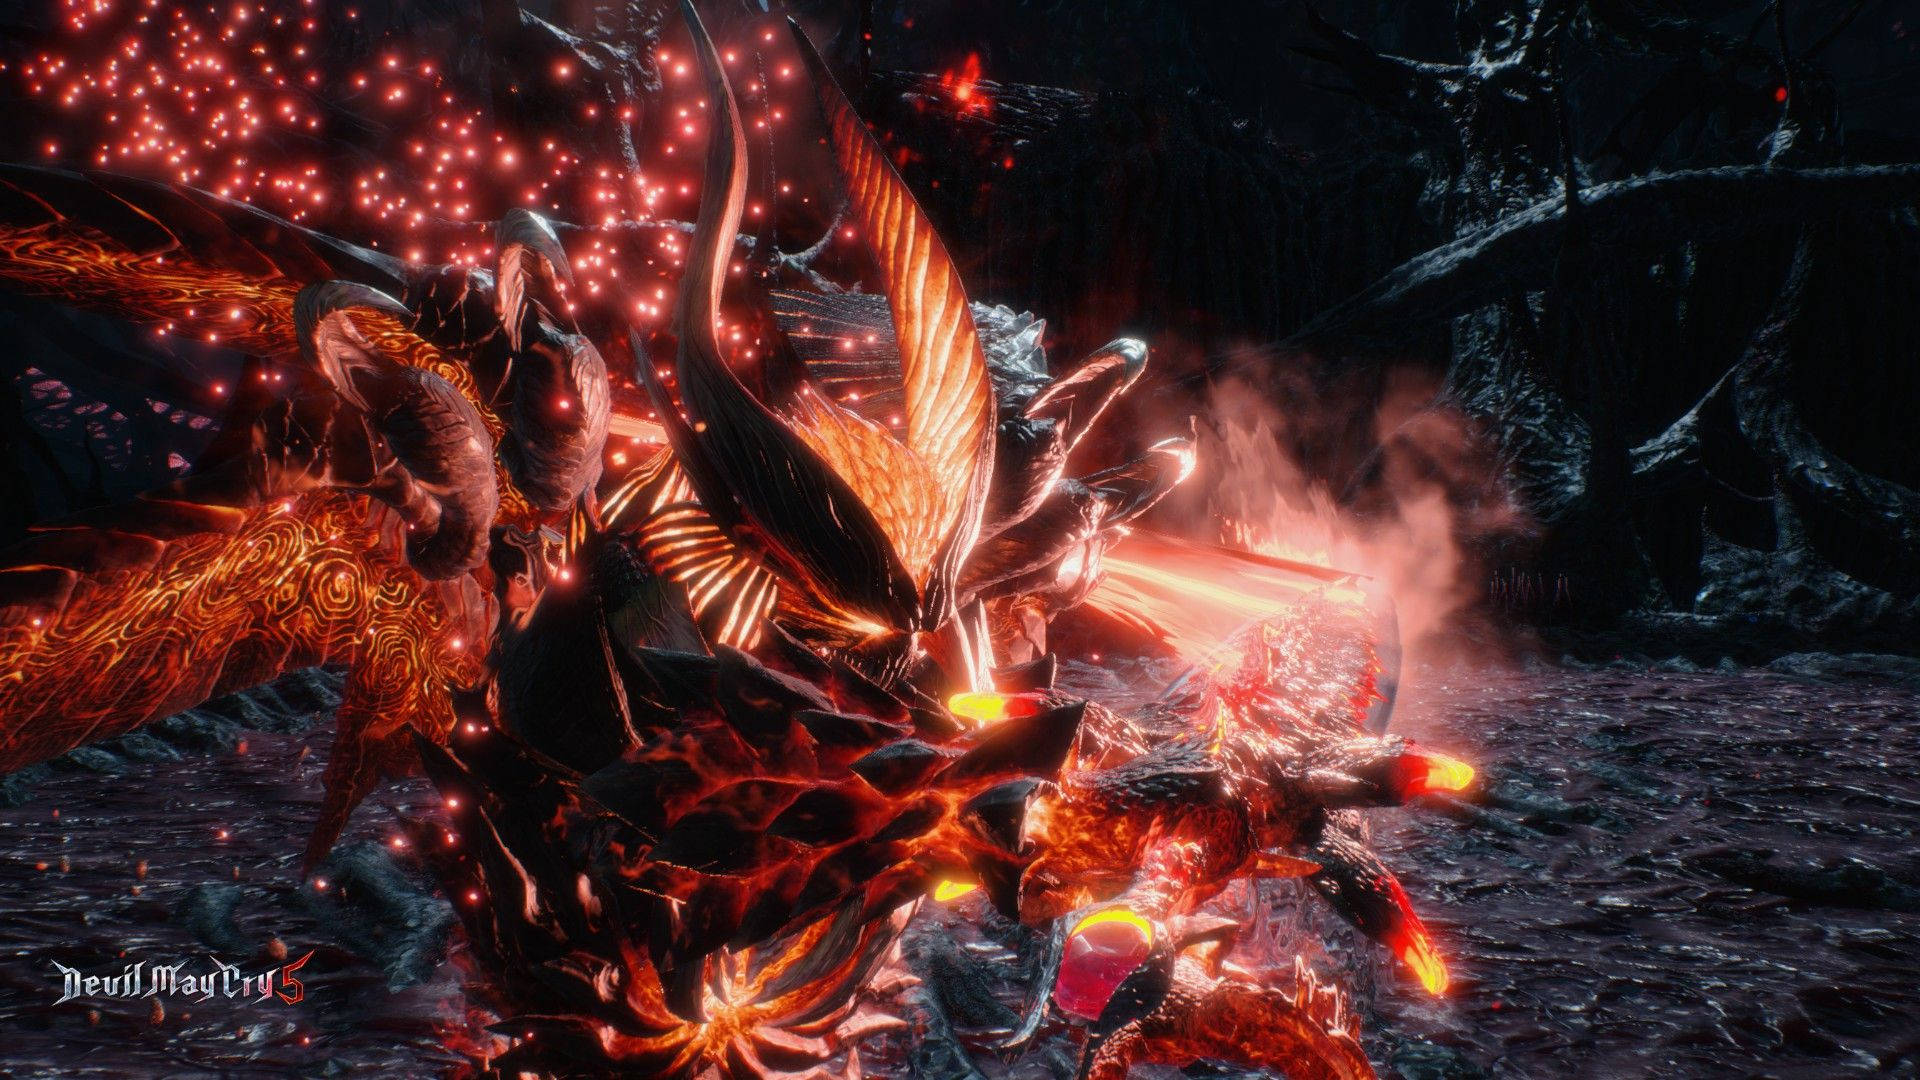 Get Ready to Take on the Infinite Devils in Devil May Cry 5 Wallpaper